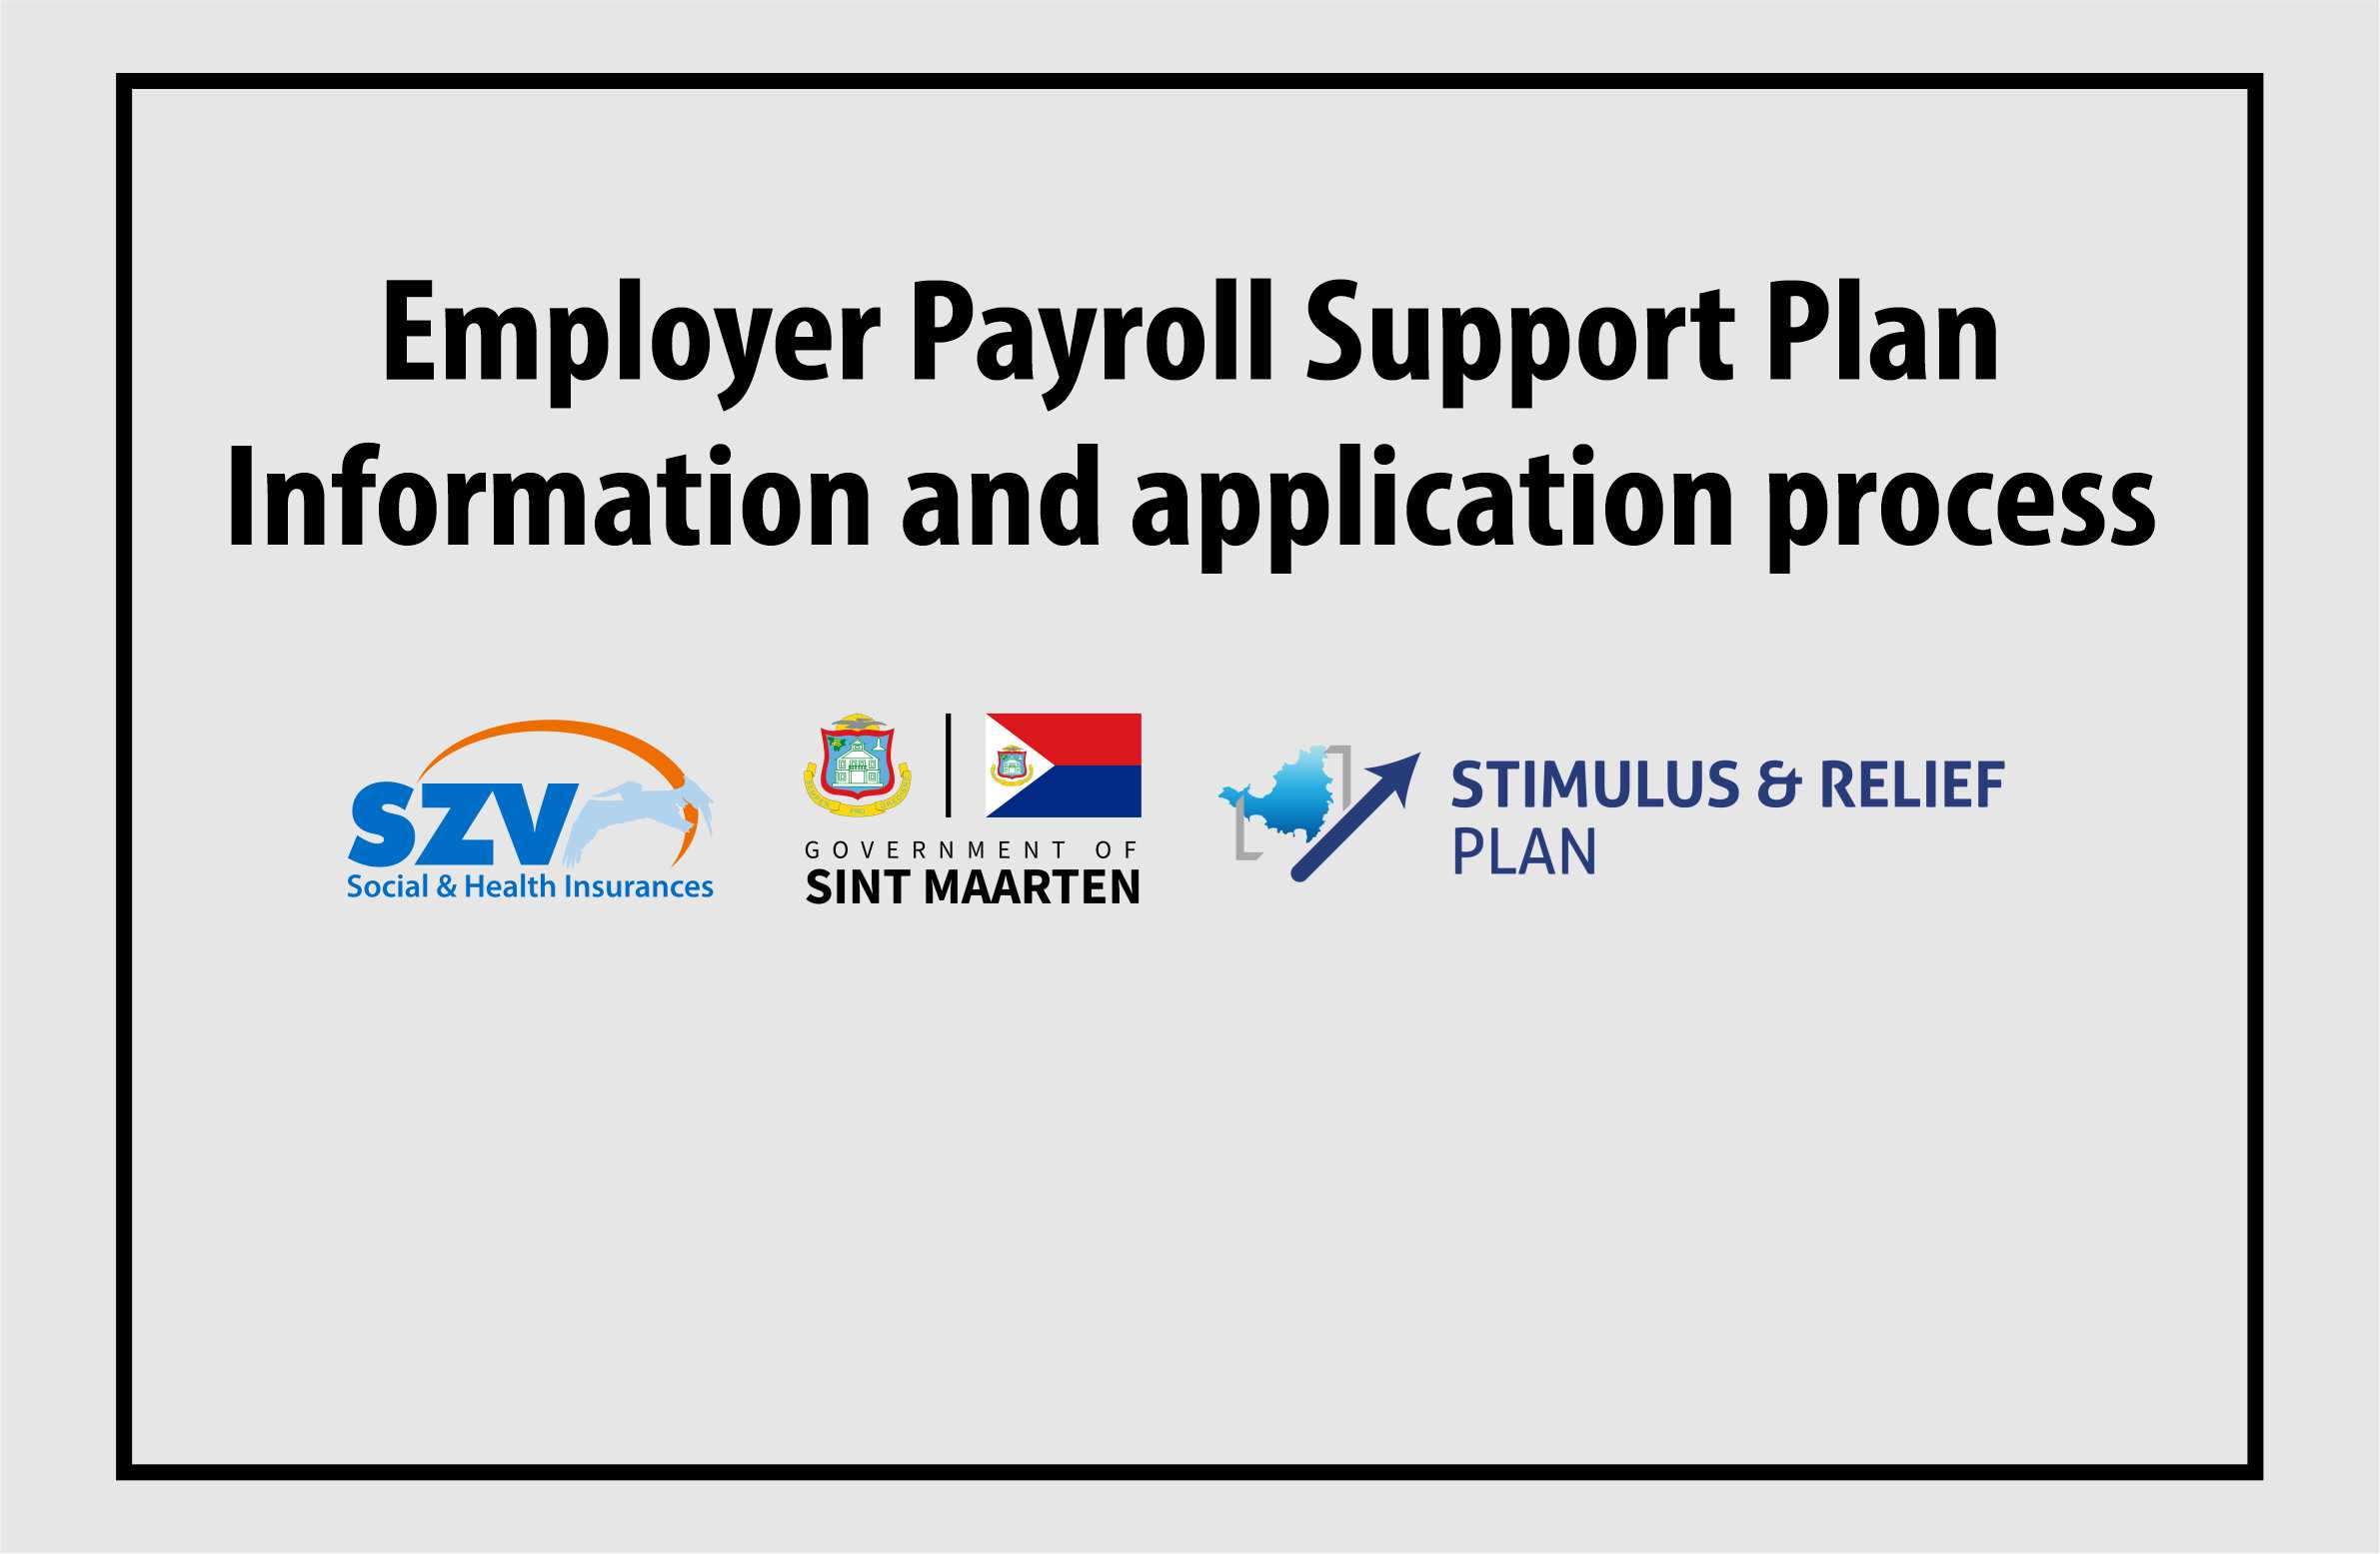 Employers: Information and application process Payroll Support Plan